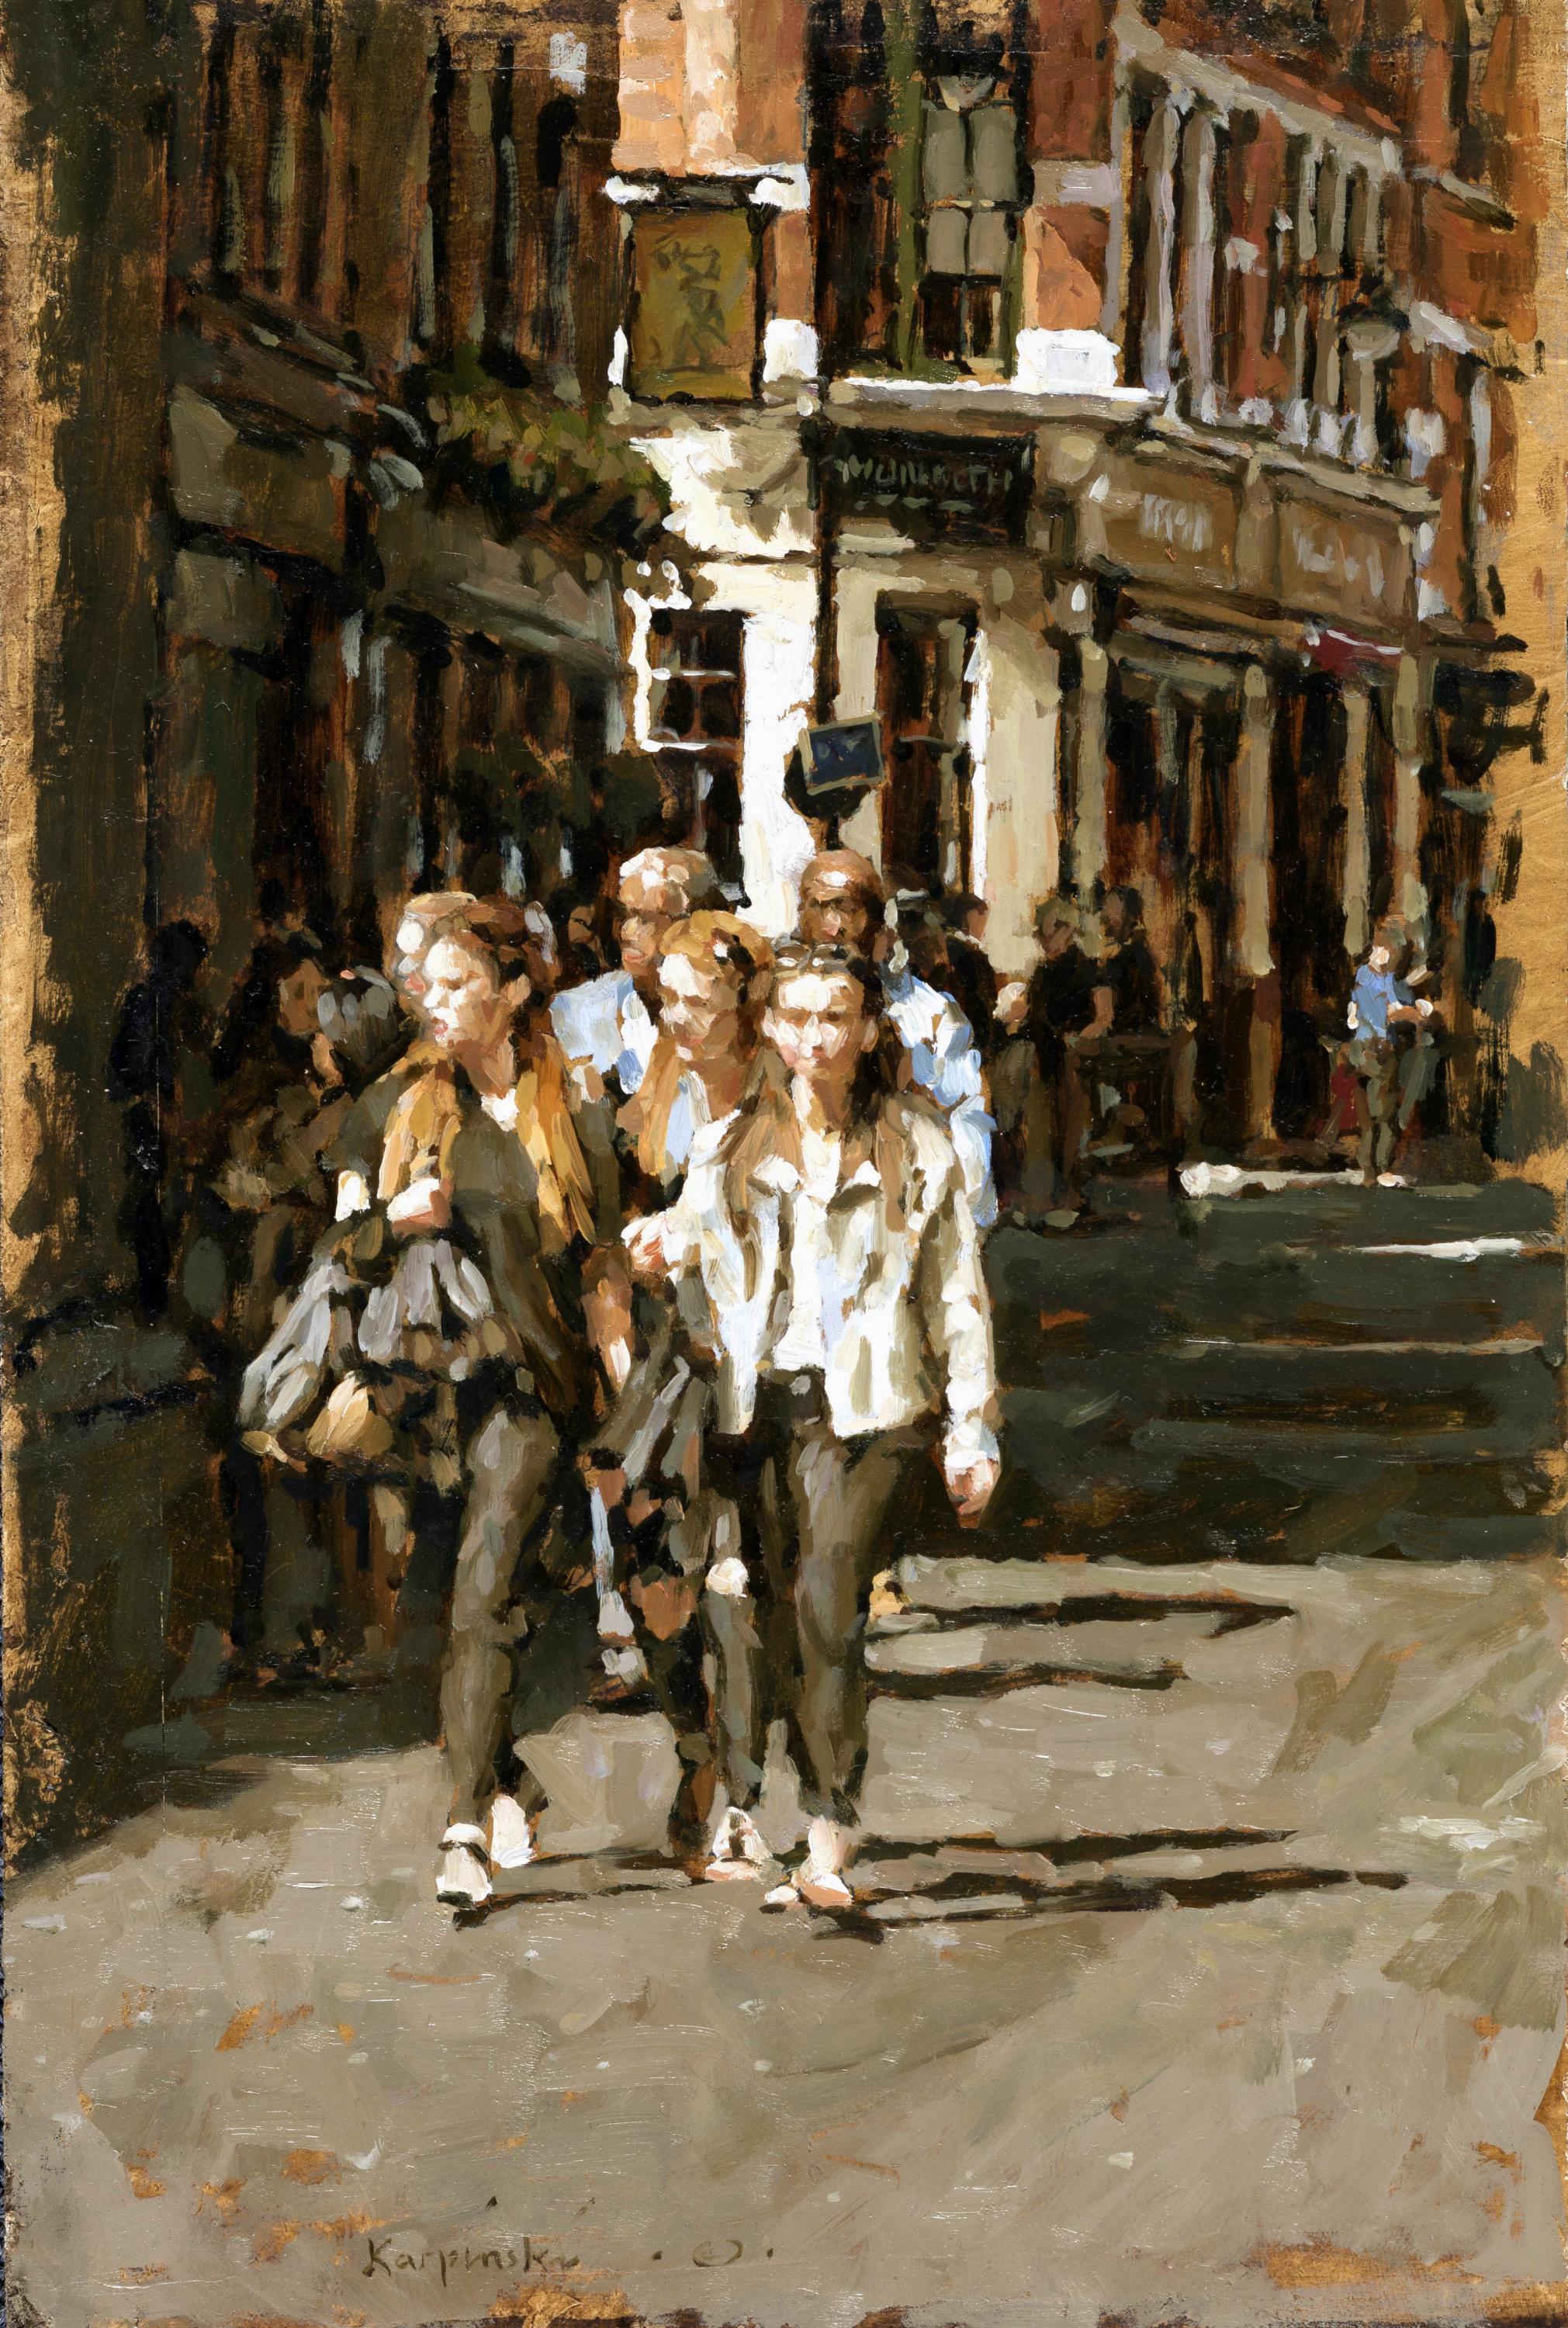 Out with Friends - Painting by Tony Karpinski